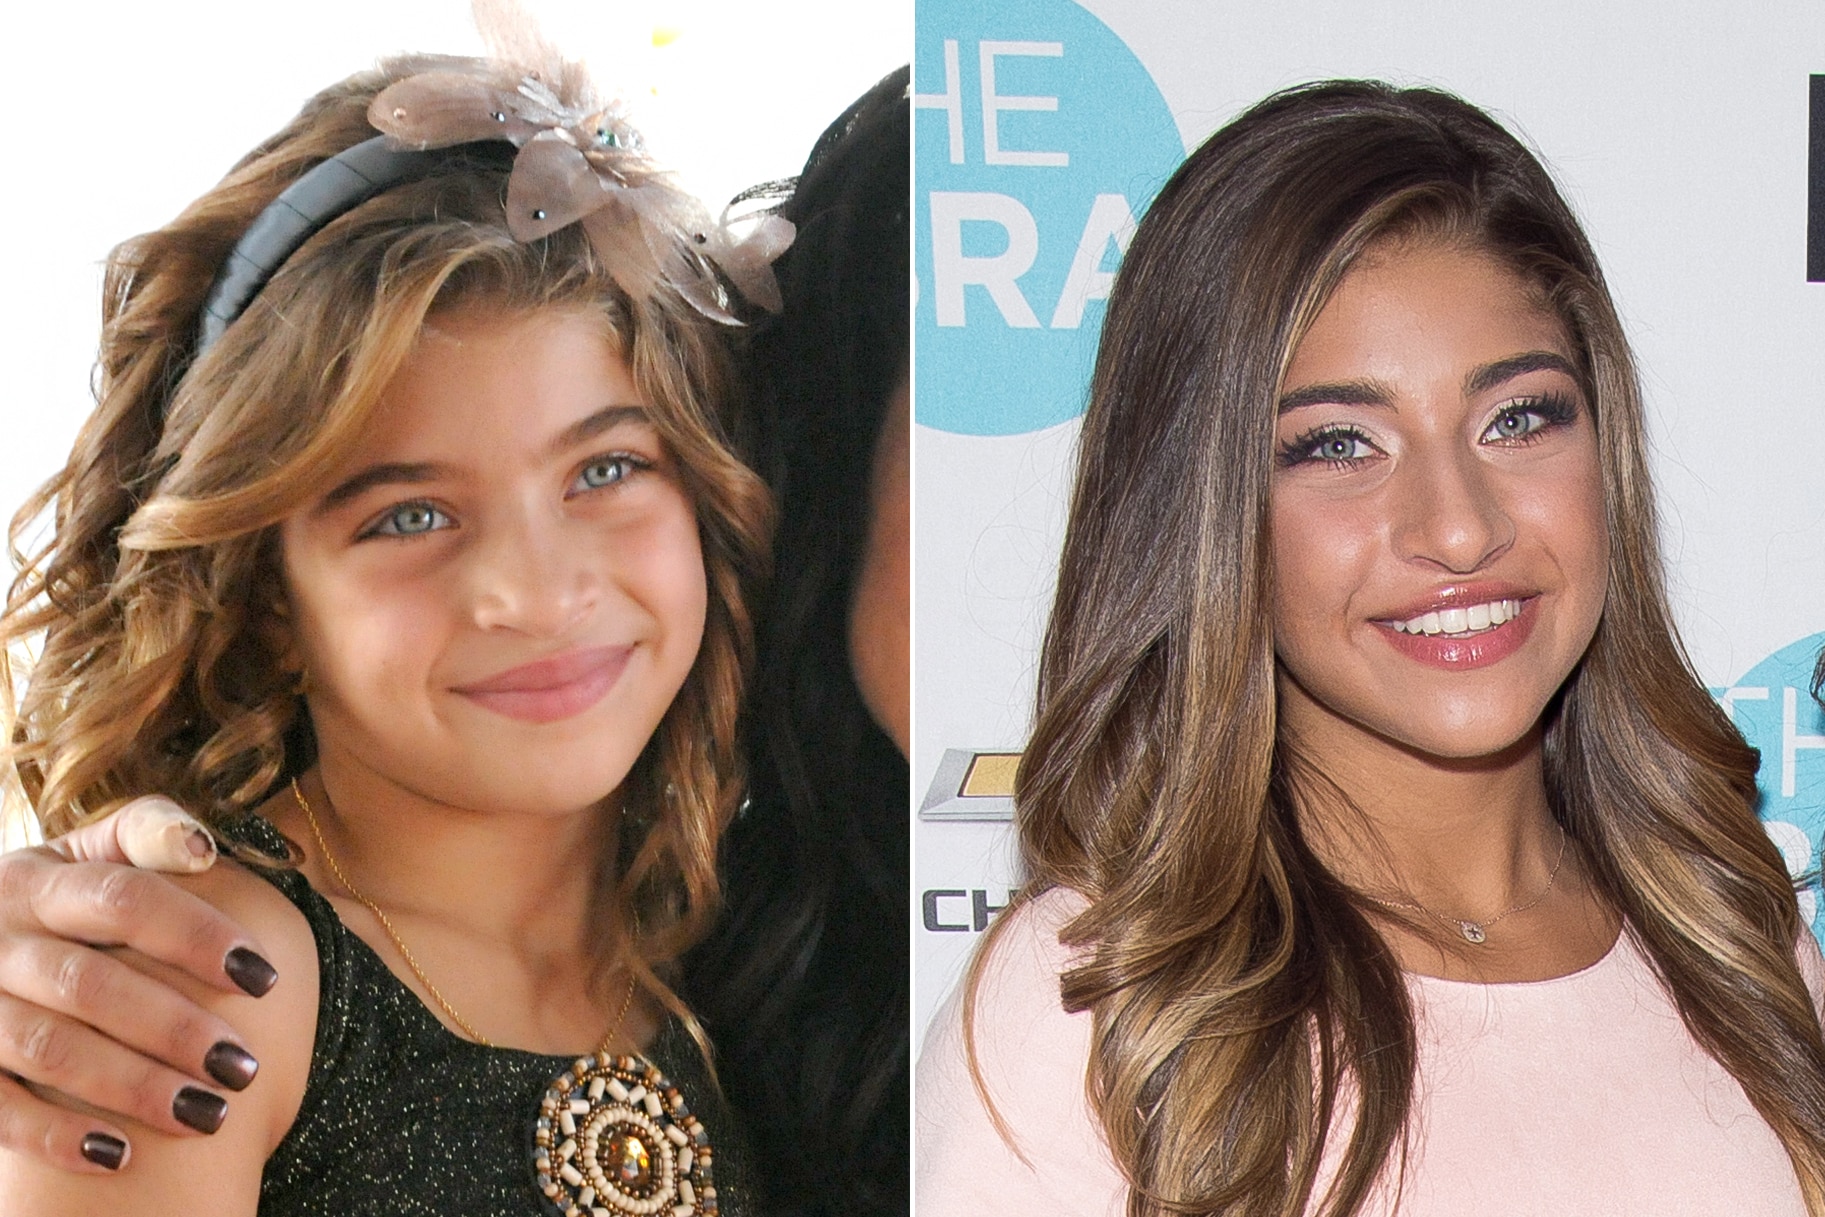 Real Housewives' Children, Then and Now: Pictures